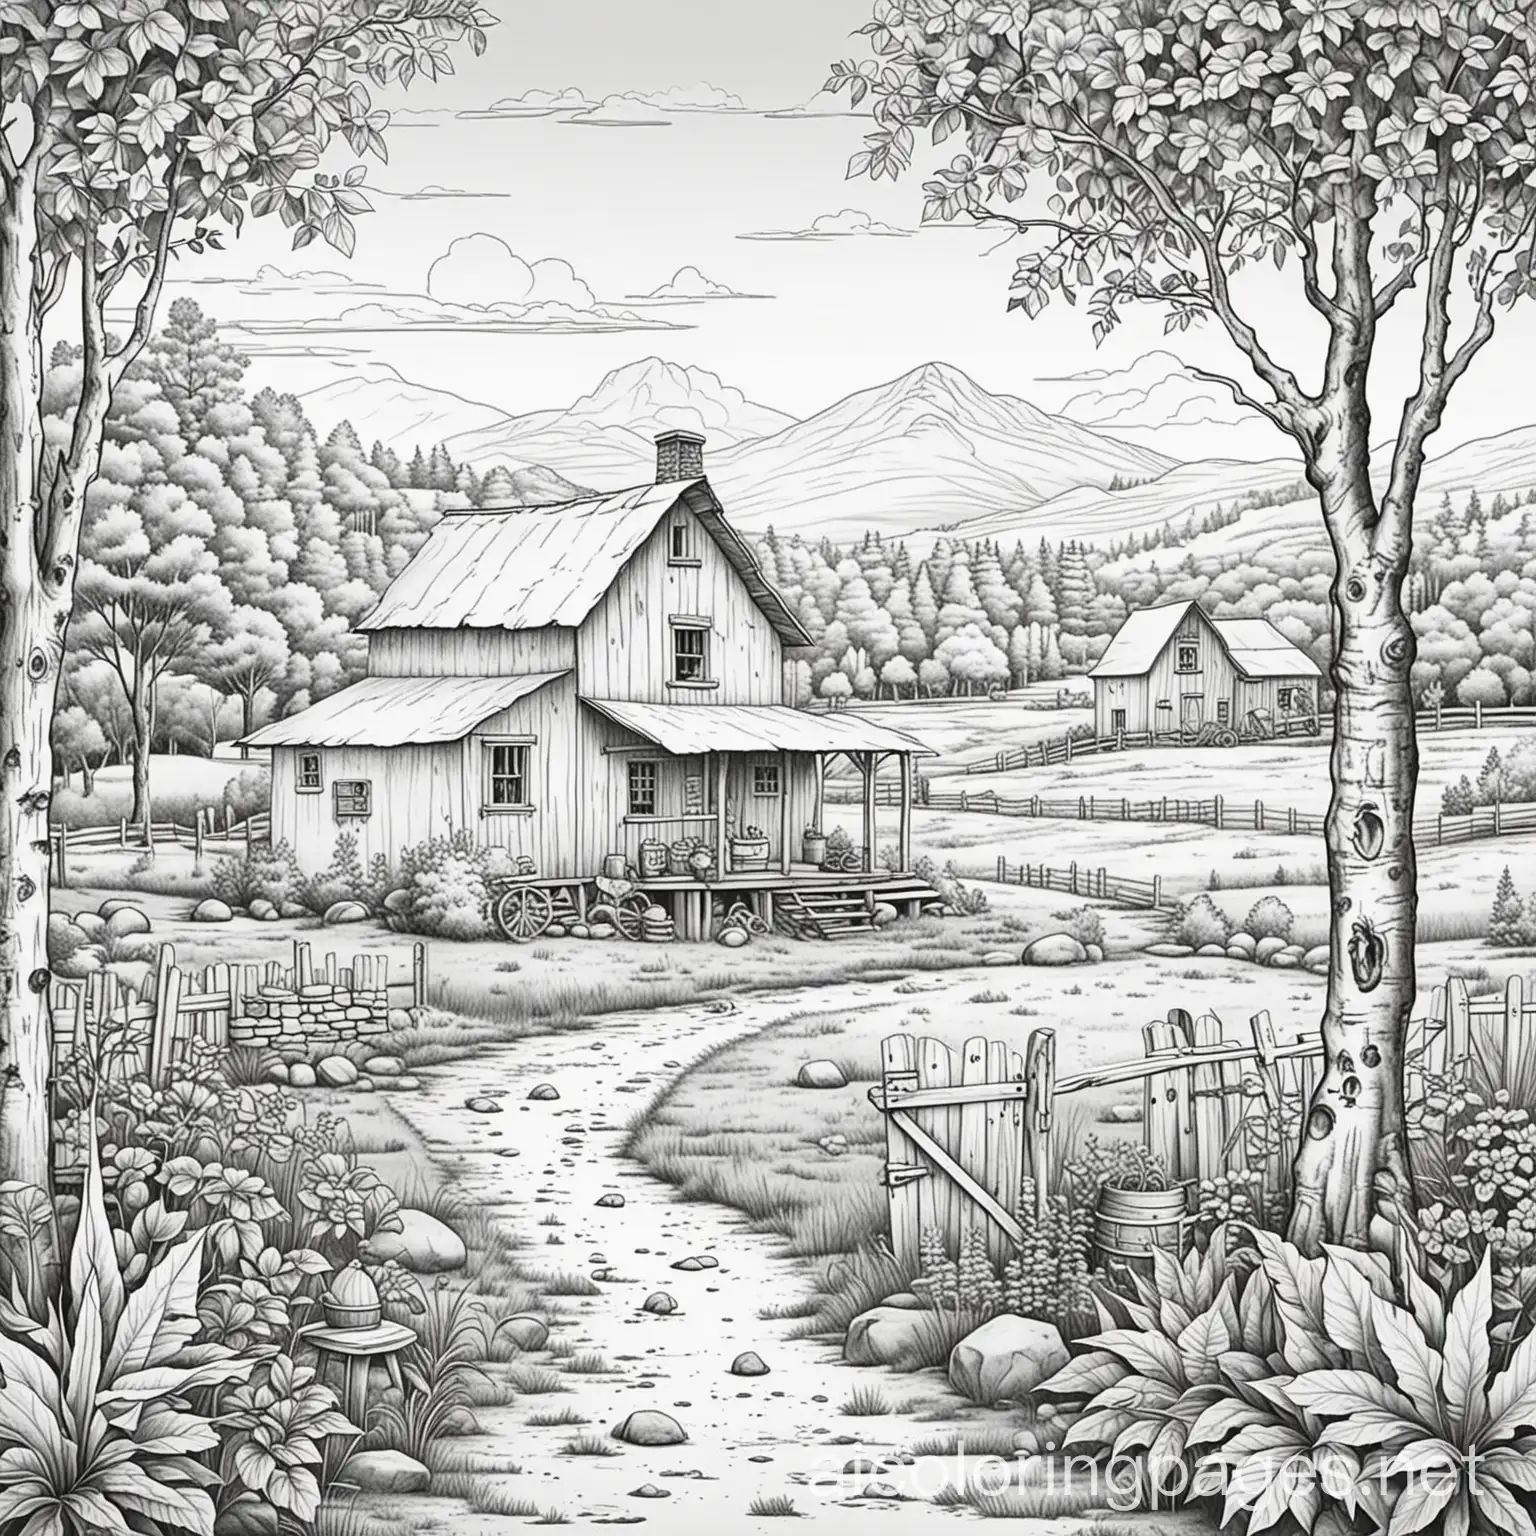 rustic country scene with primitive decor, Coloring Page, black and white, line art, white background, Simplicity, Ample White Space. The background of the coloring page is plain white to make it easy for young children to color within the lines. The outlines of all the subjects are easy to distinguish, making it simple for kids to color without too much difficulty